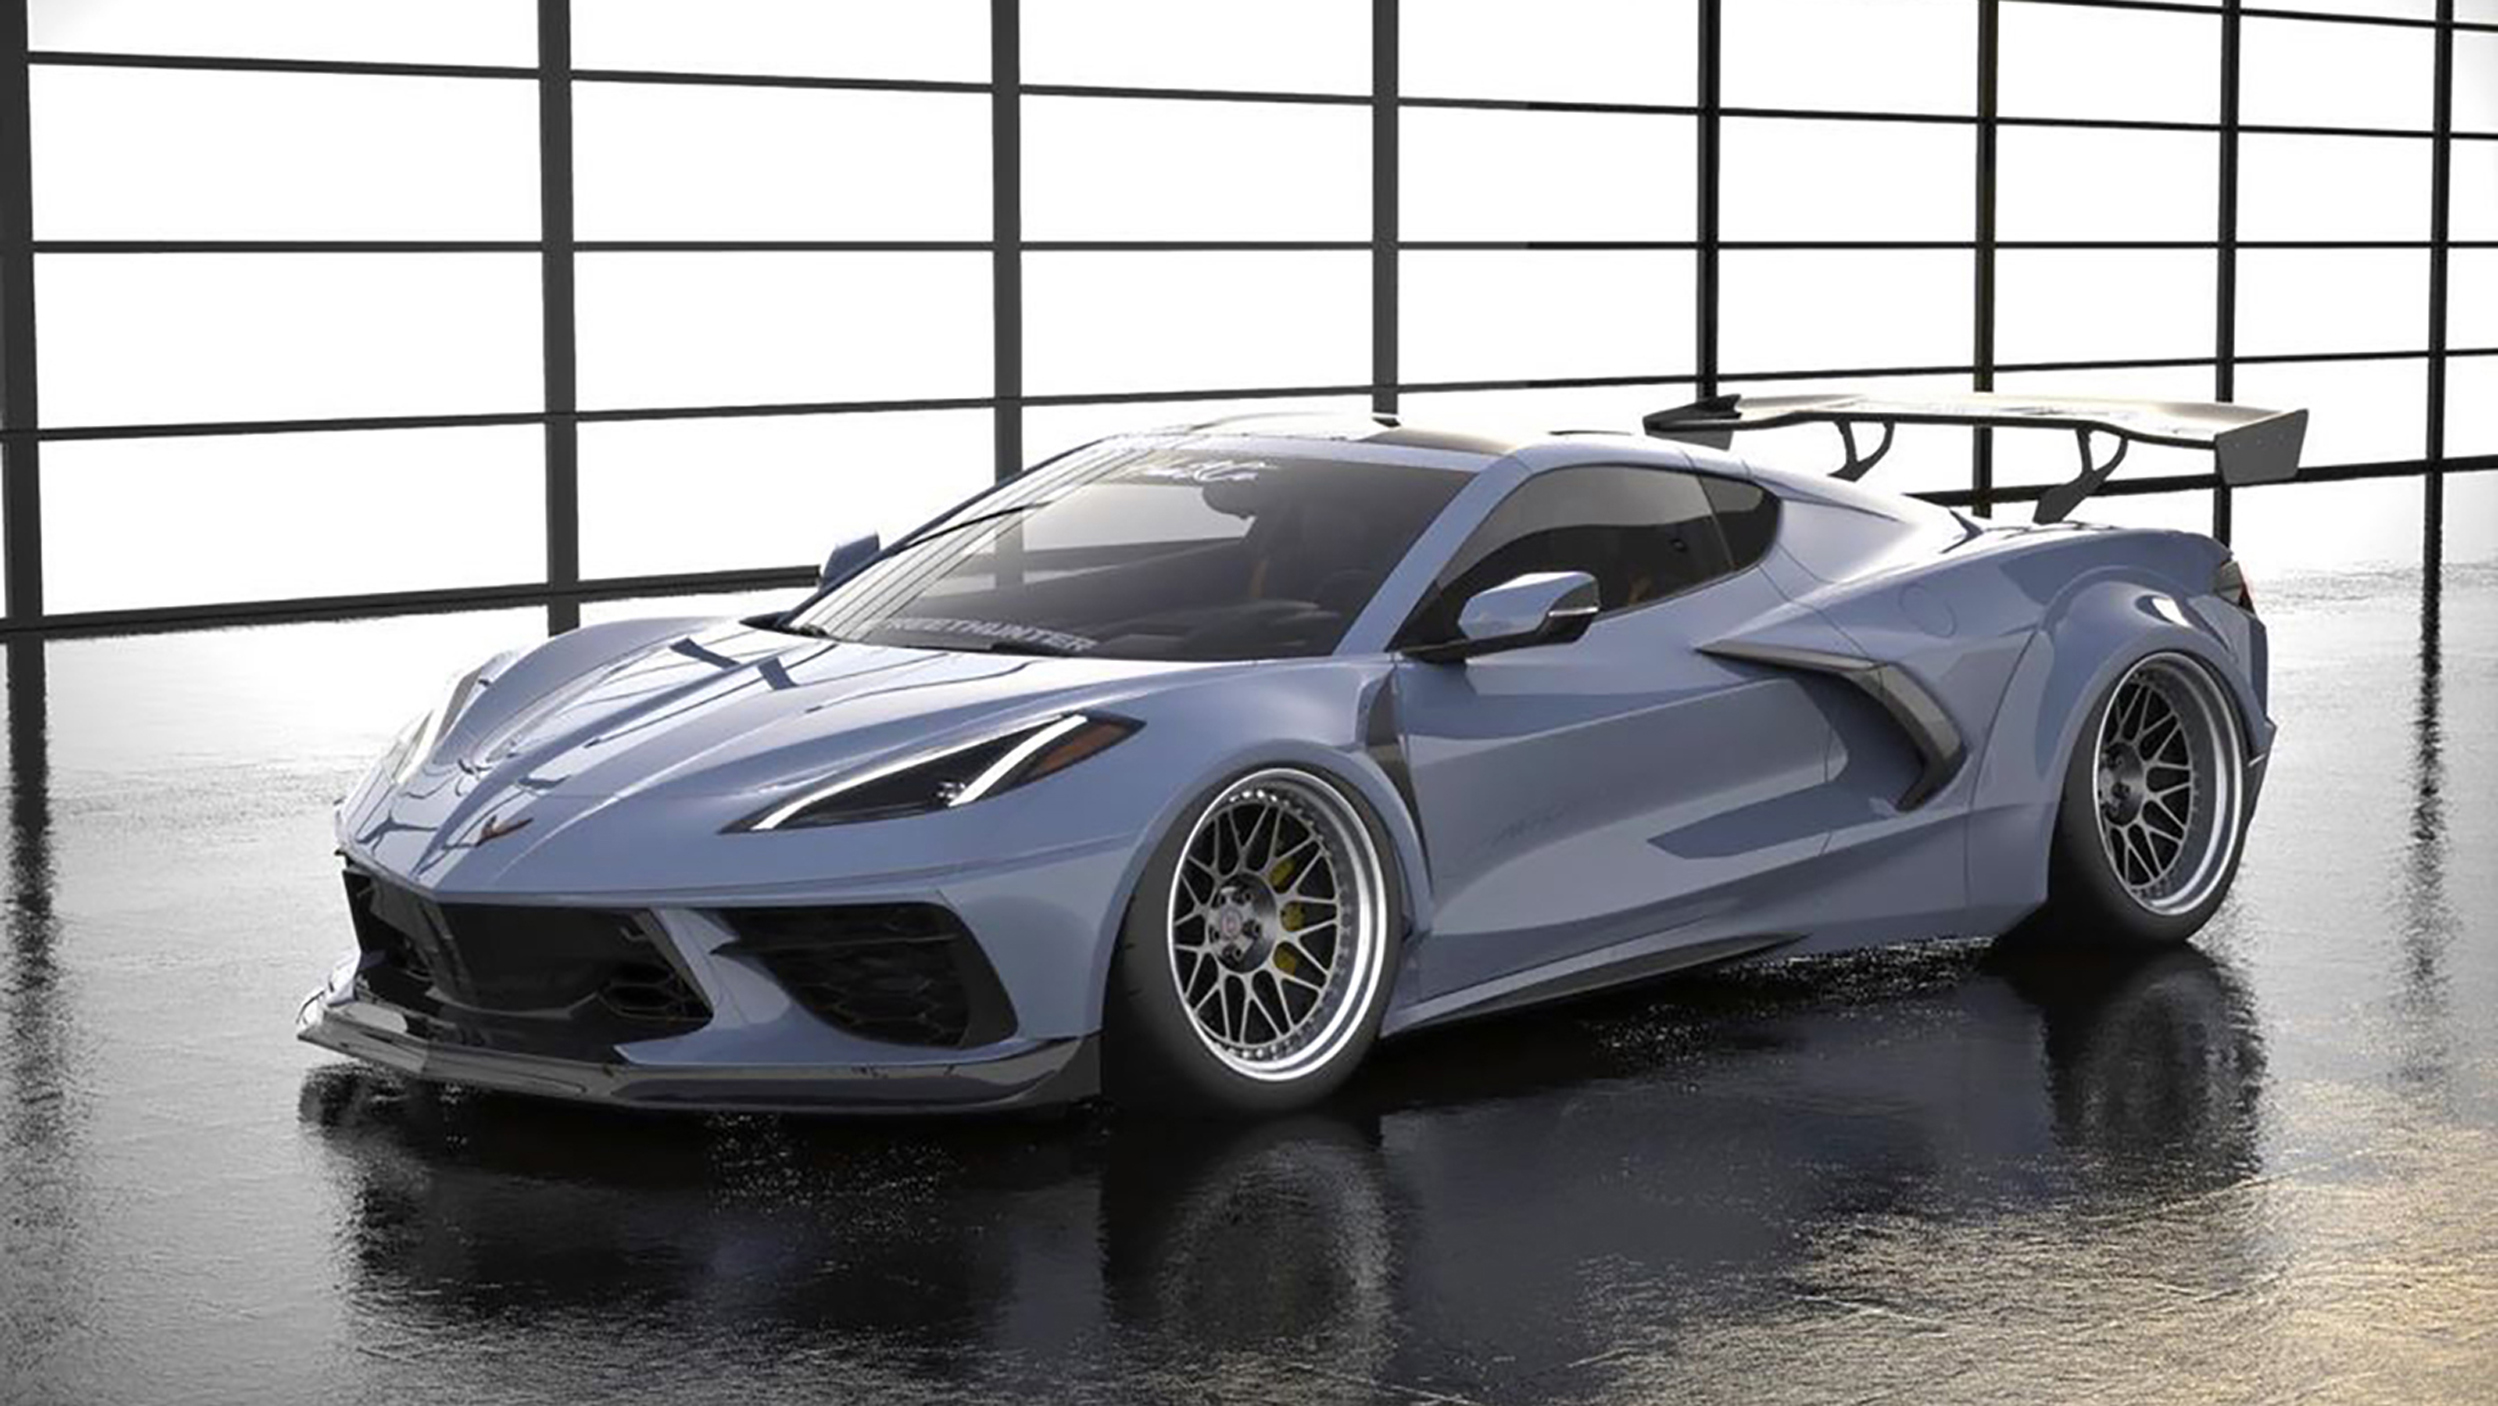 2020 Corvette C8 Lowered Widebody Kit Is In The Works Autoblog